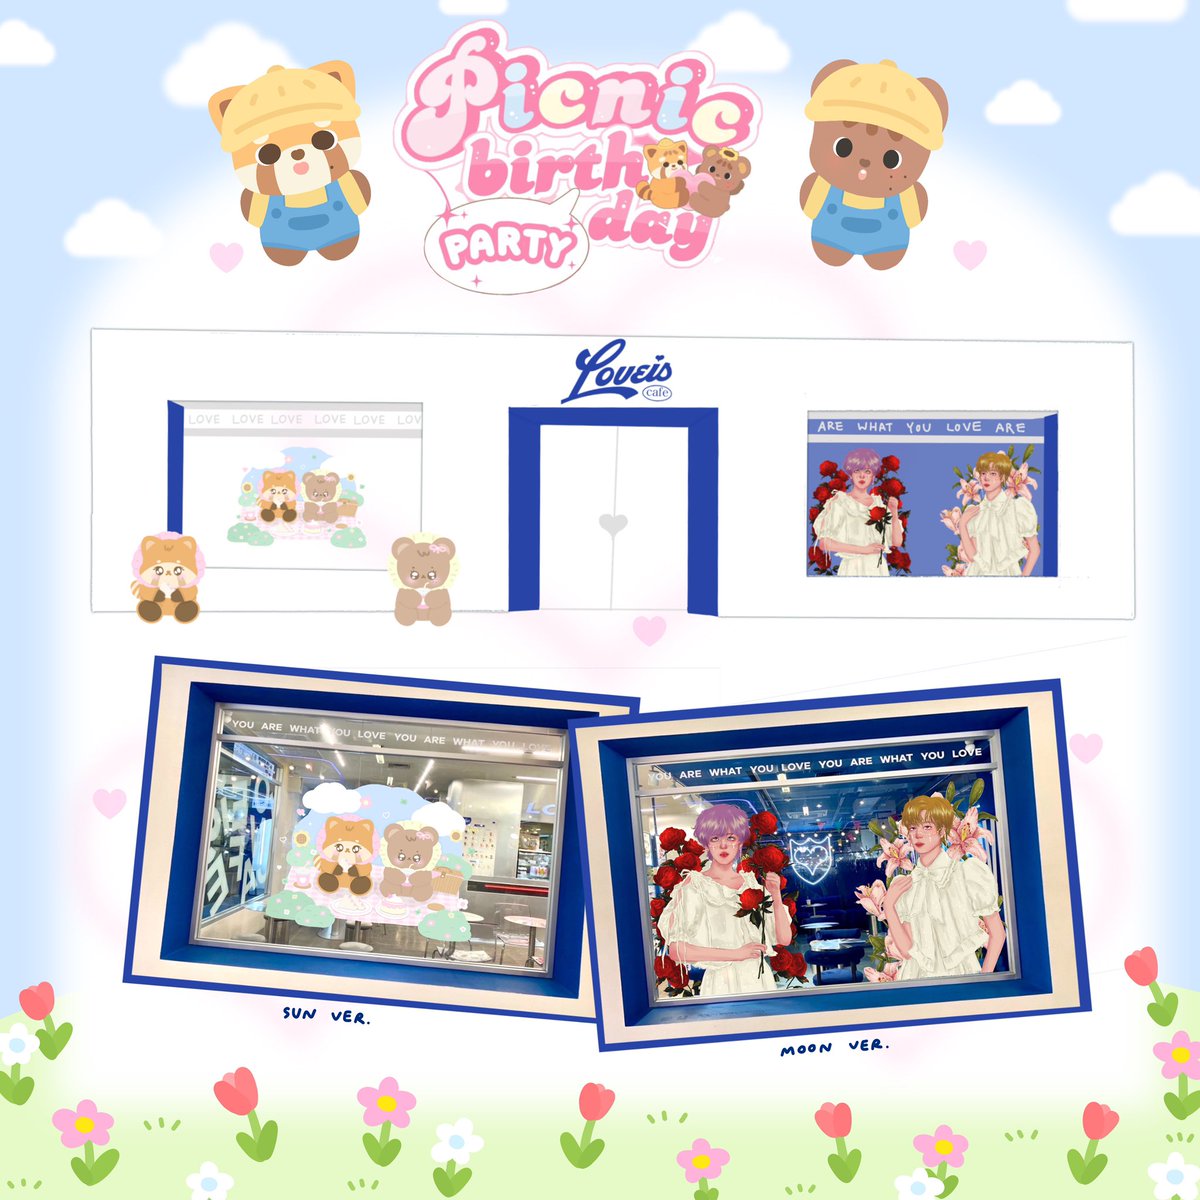 ｡ﾟﾟ･｡･ﾟﾟ｡
ﾟ。  𝒫review ⋆·˚ 🎀
 SUN & MOON Picnic birthday cafe 
    ﾟ･｡･ﾟ
             
         𝐹an art collab X @sudthi1410 

𓂃⋆♡ 8-9 June 2024  
💒 LOVEiS Cafe at Lido connect 
 ఇ 10.00 - 20.00

#PICNIC_BDwithSUNandMOON 
#HAPPYHAECHANDAY #HAPPYTAEILDAY